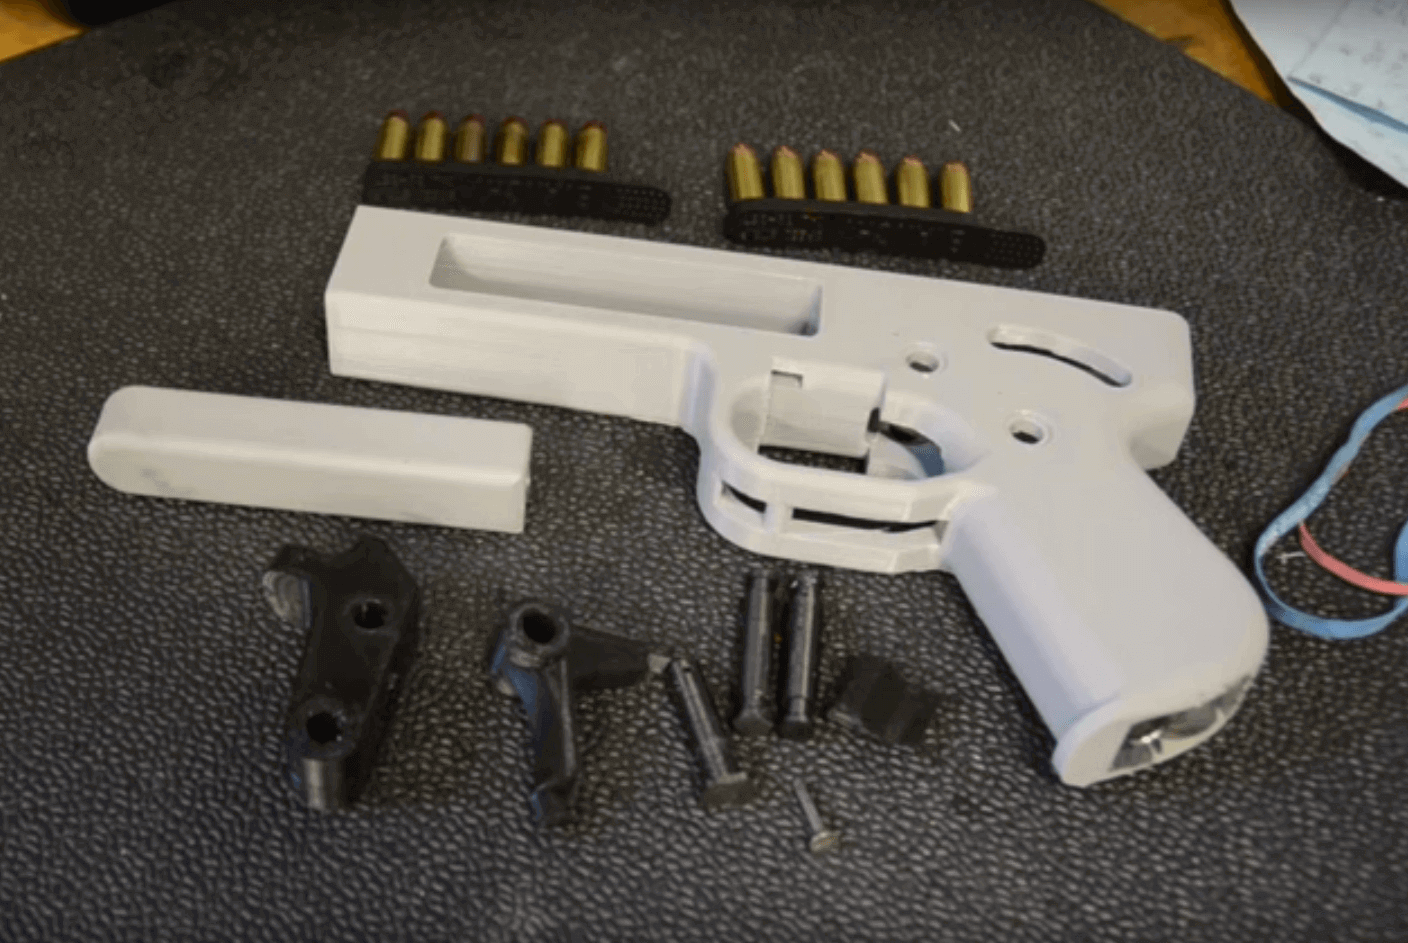 Myre vitalitet Anonym 3D Printed Gun "Songbird" Uses Nails And Office Supplies | All3DP